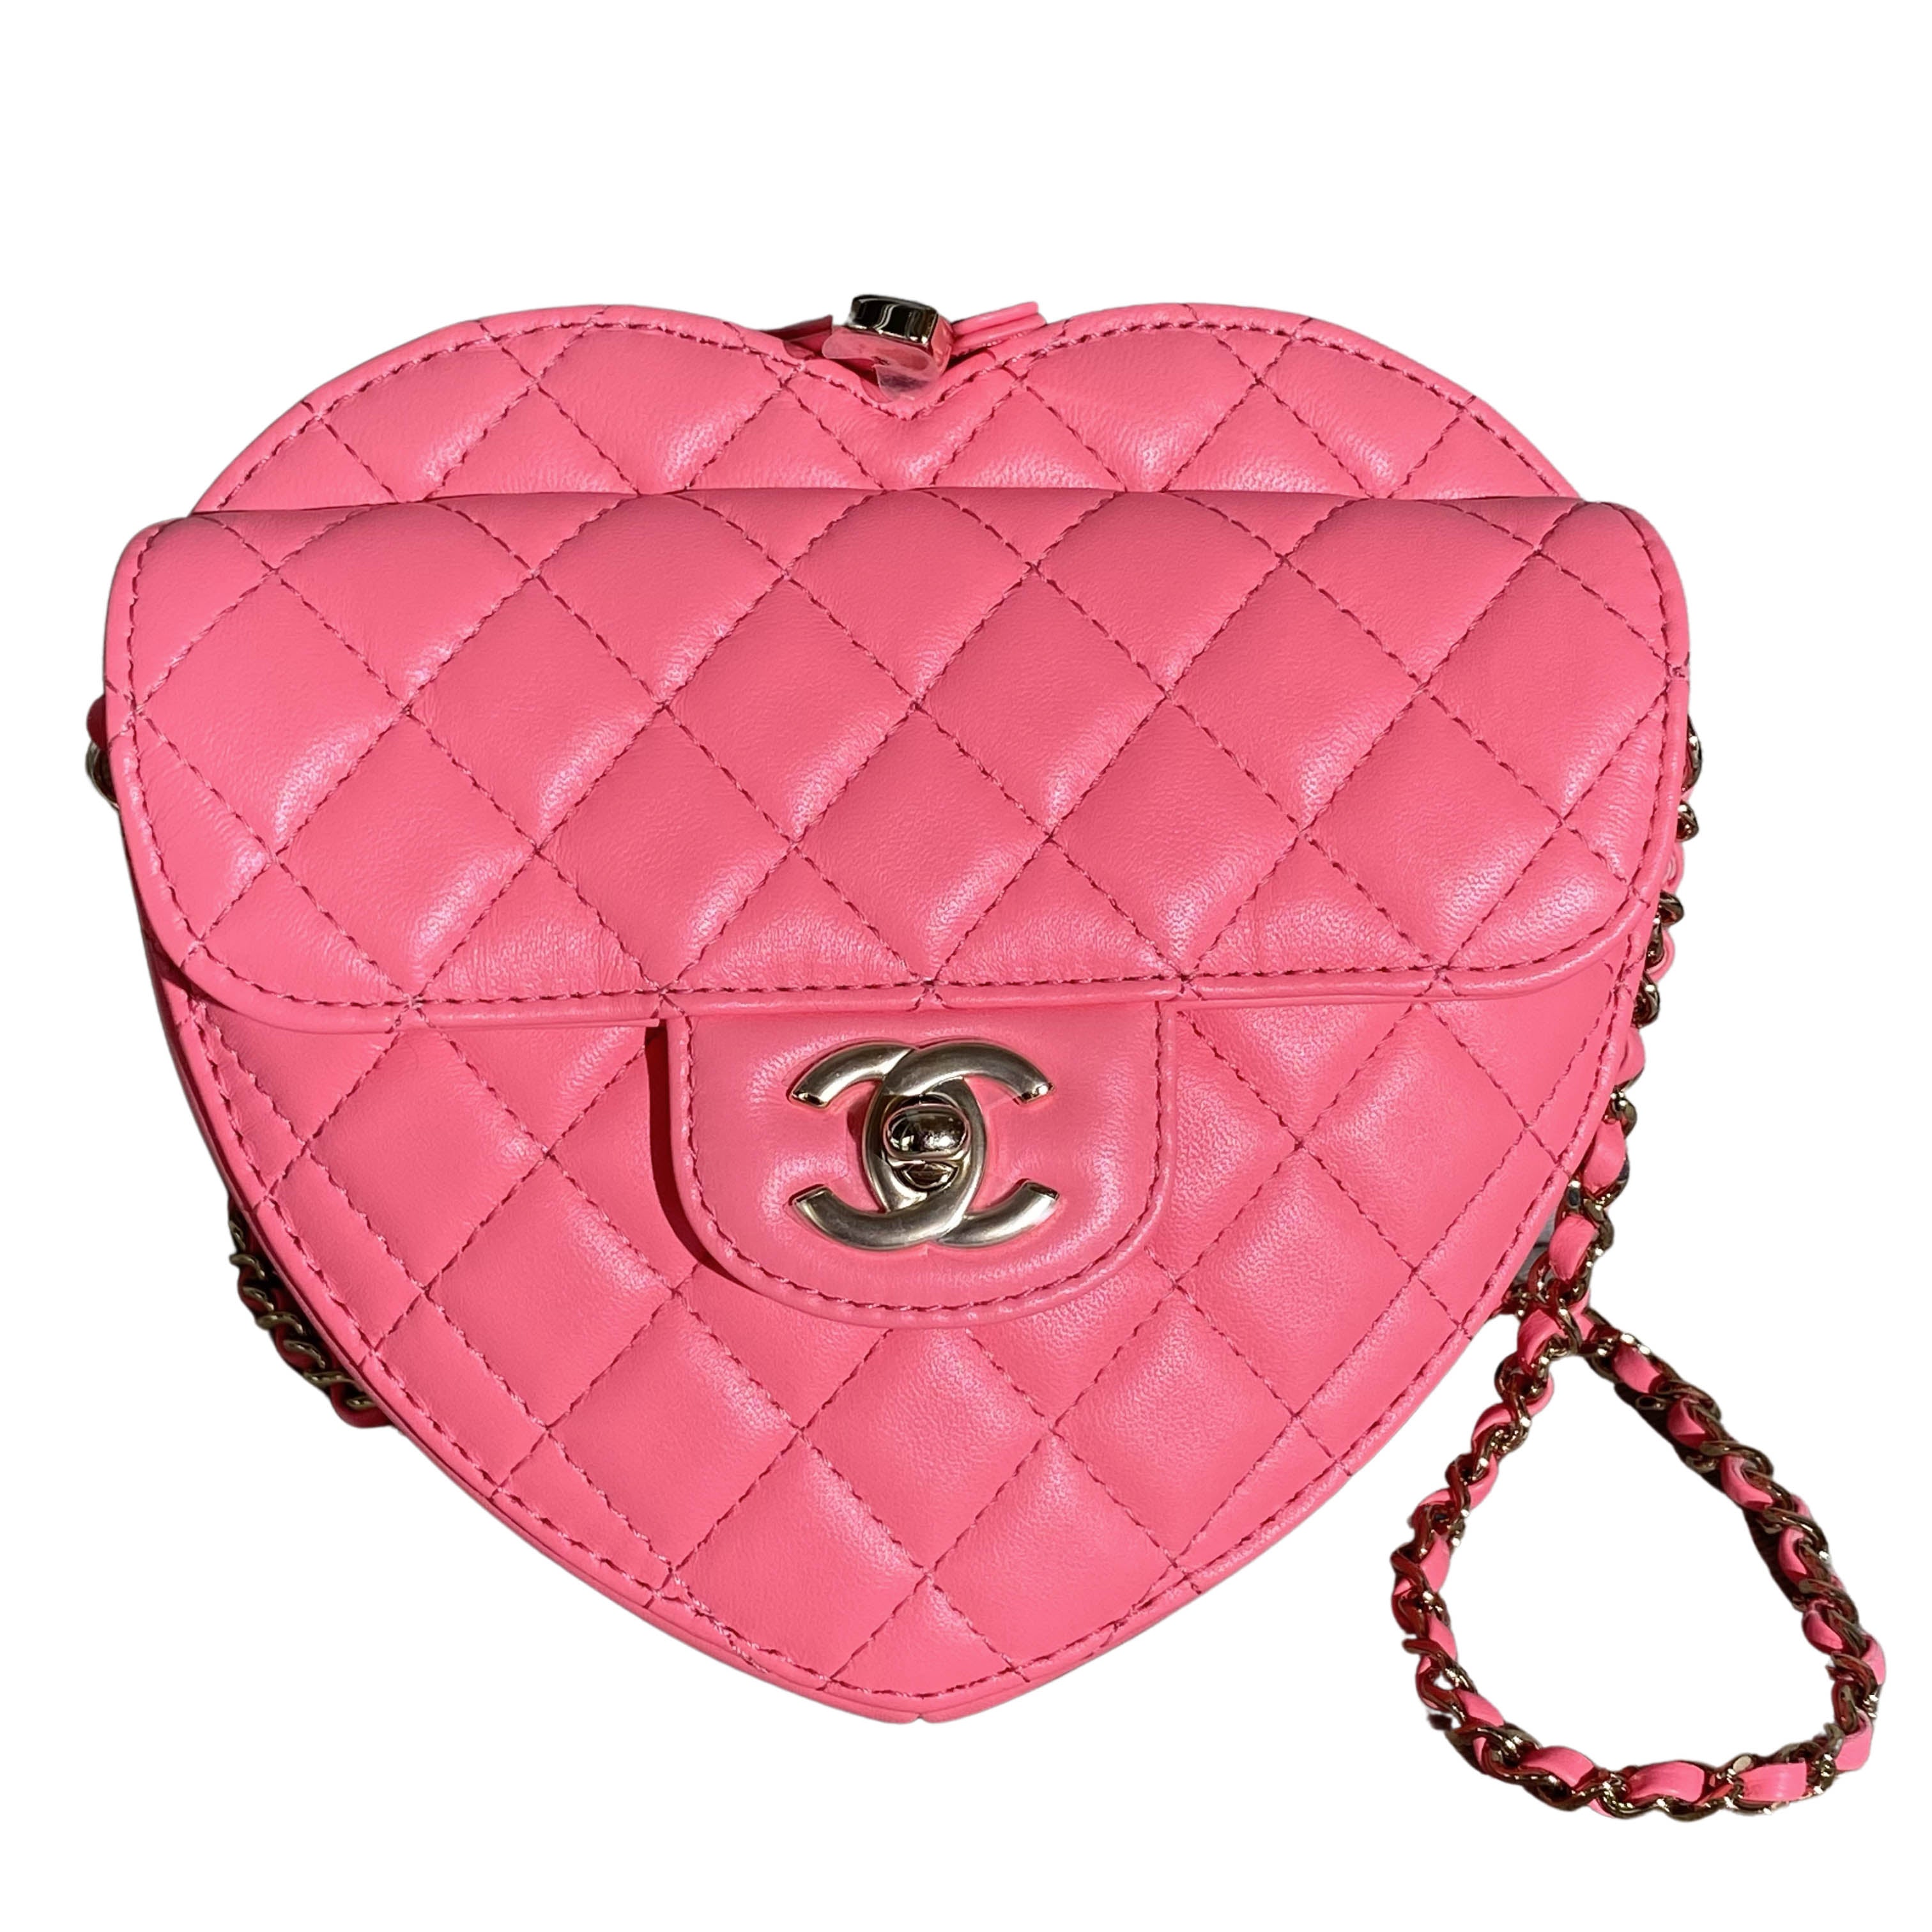 chanel bag with heart charms